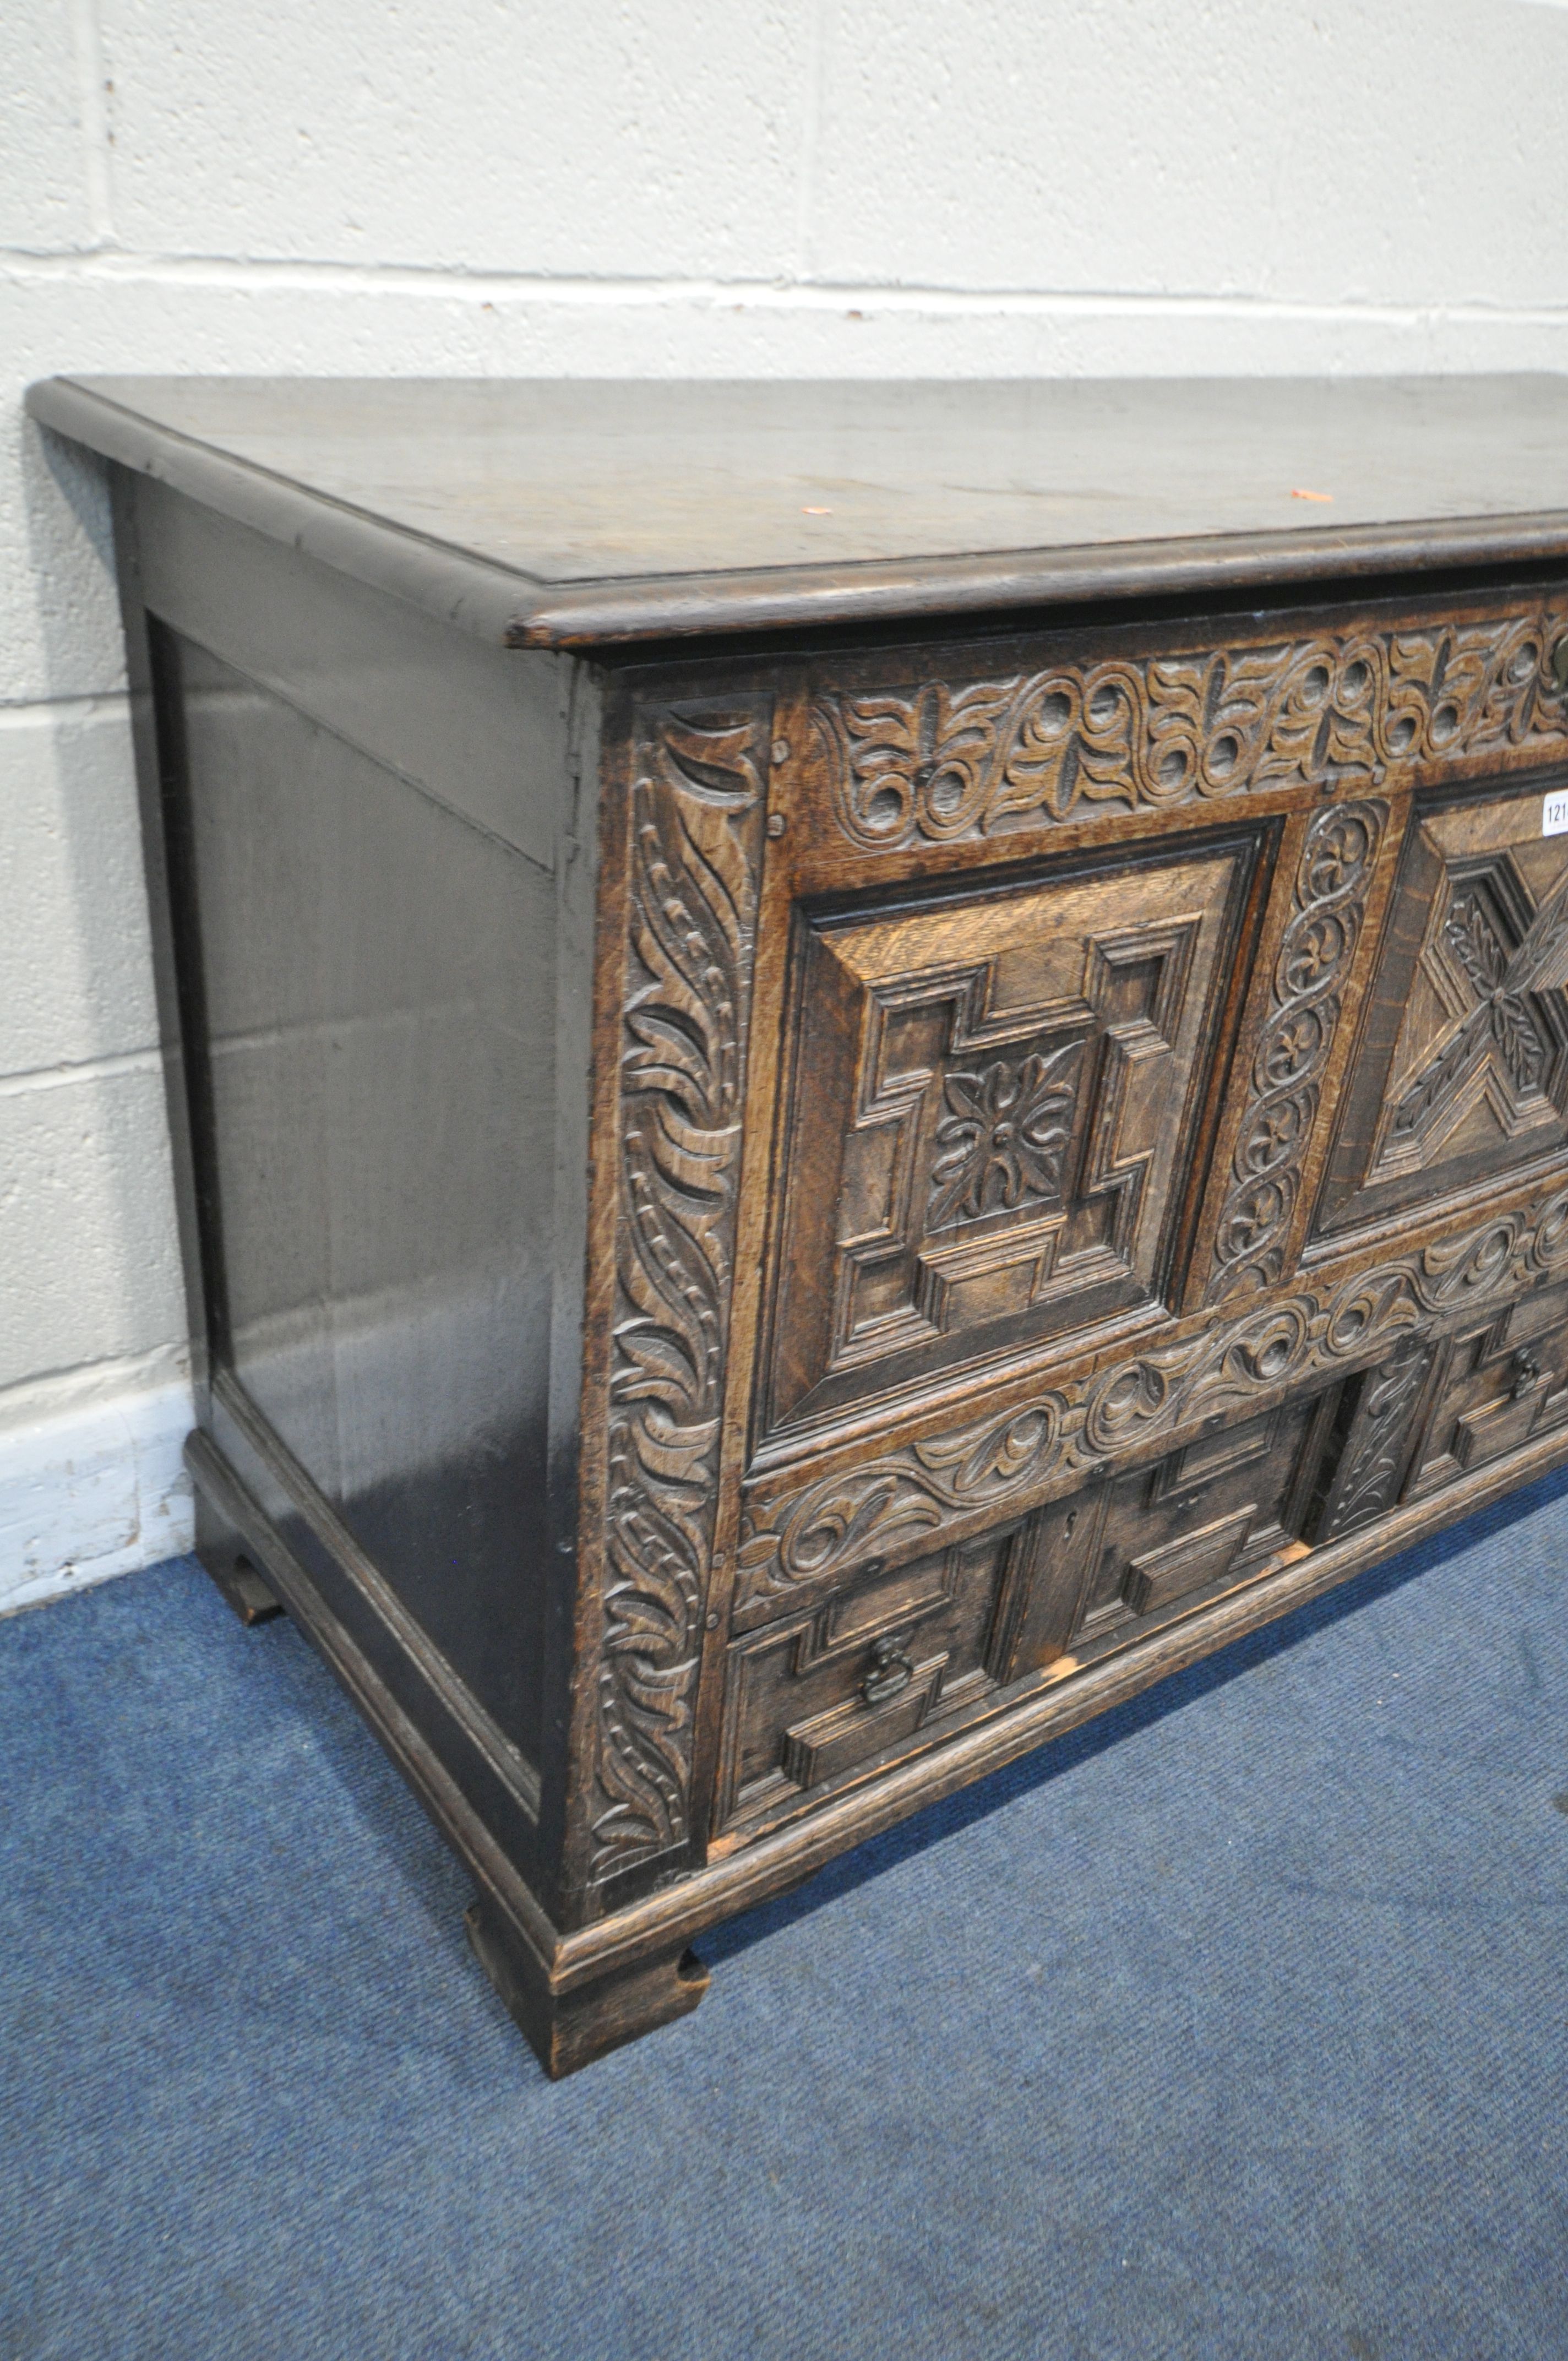 A GEORGIAN AND LATER CARVED OAK PANELLED MULE CHEST, the front with geometric panels, foliate - Image 2 of 4